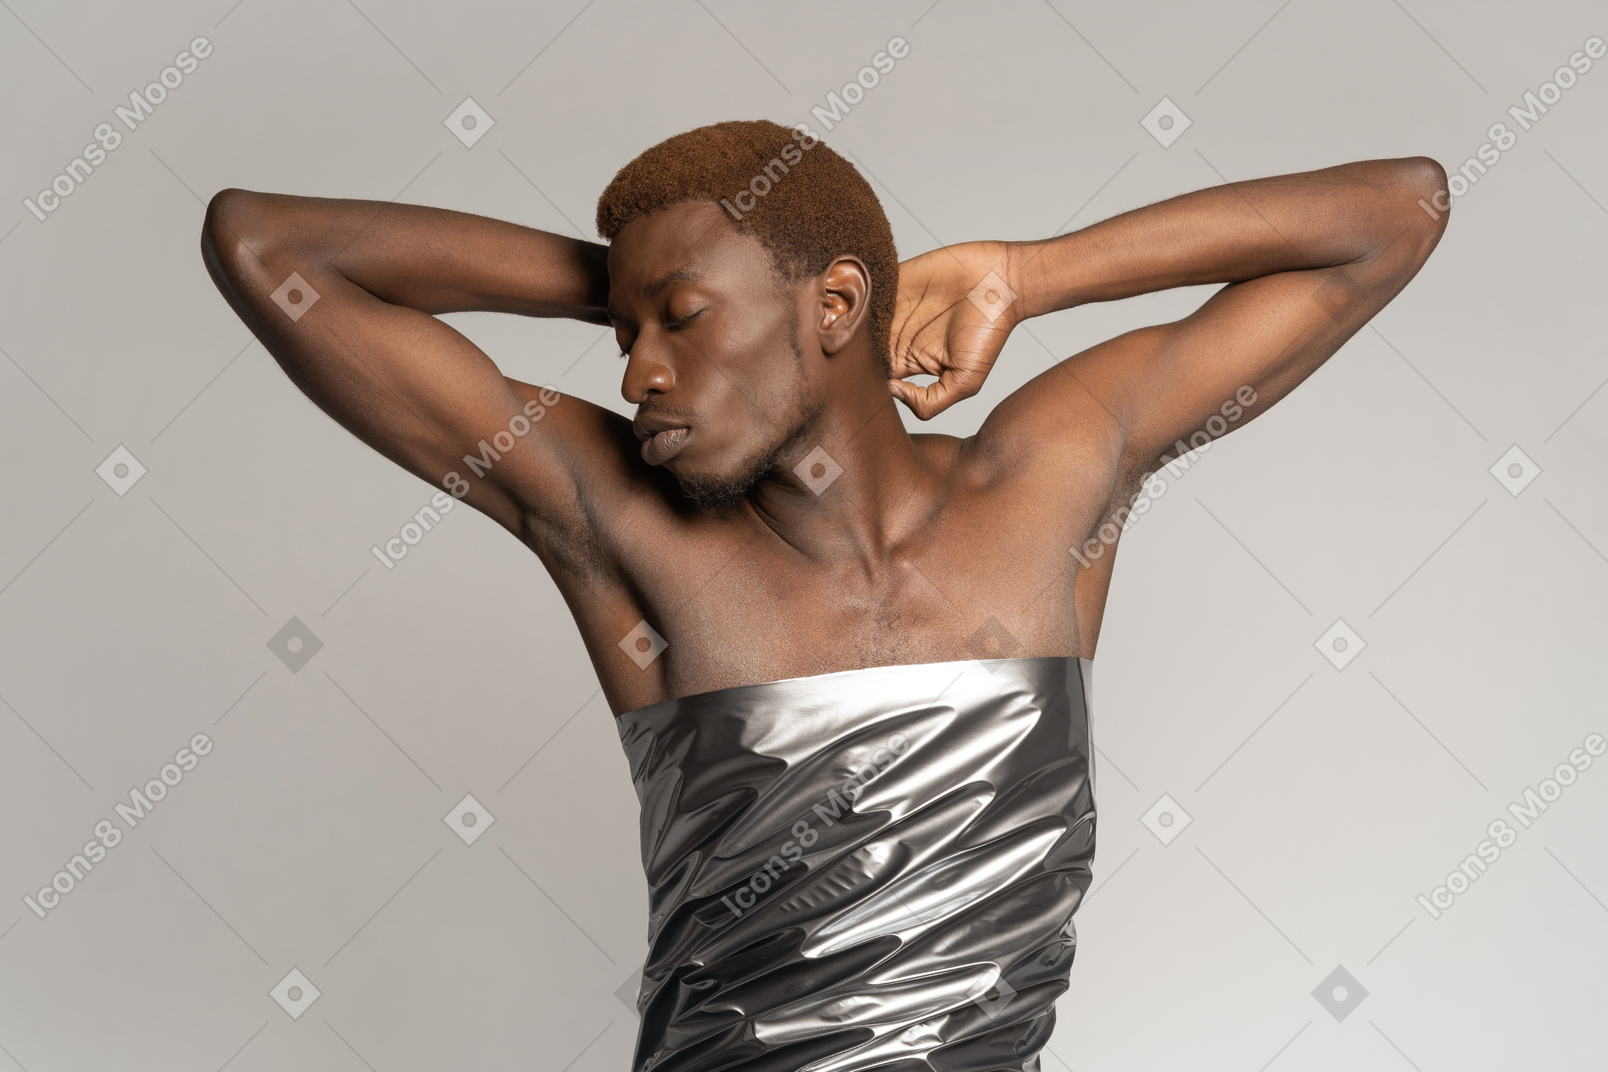 Portrait of man wrapped in silver satin